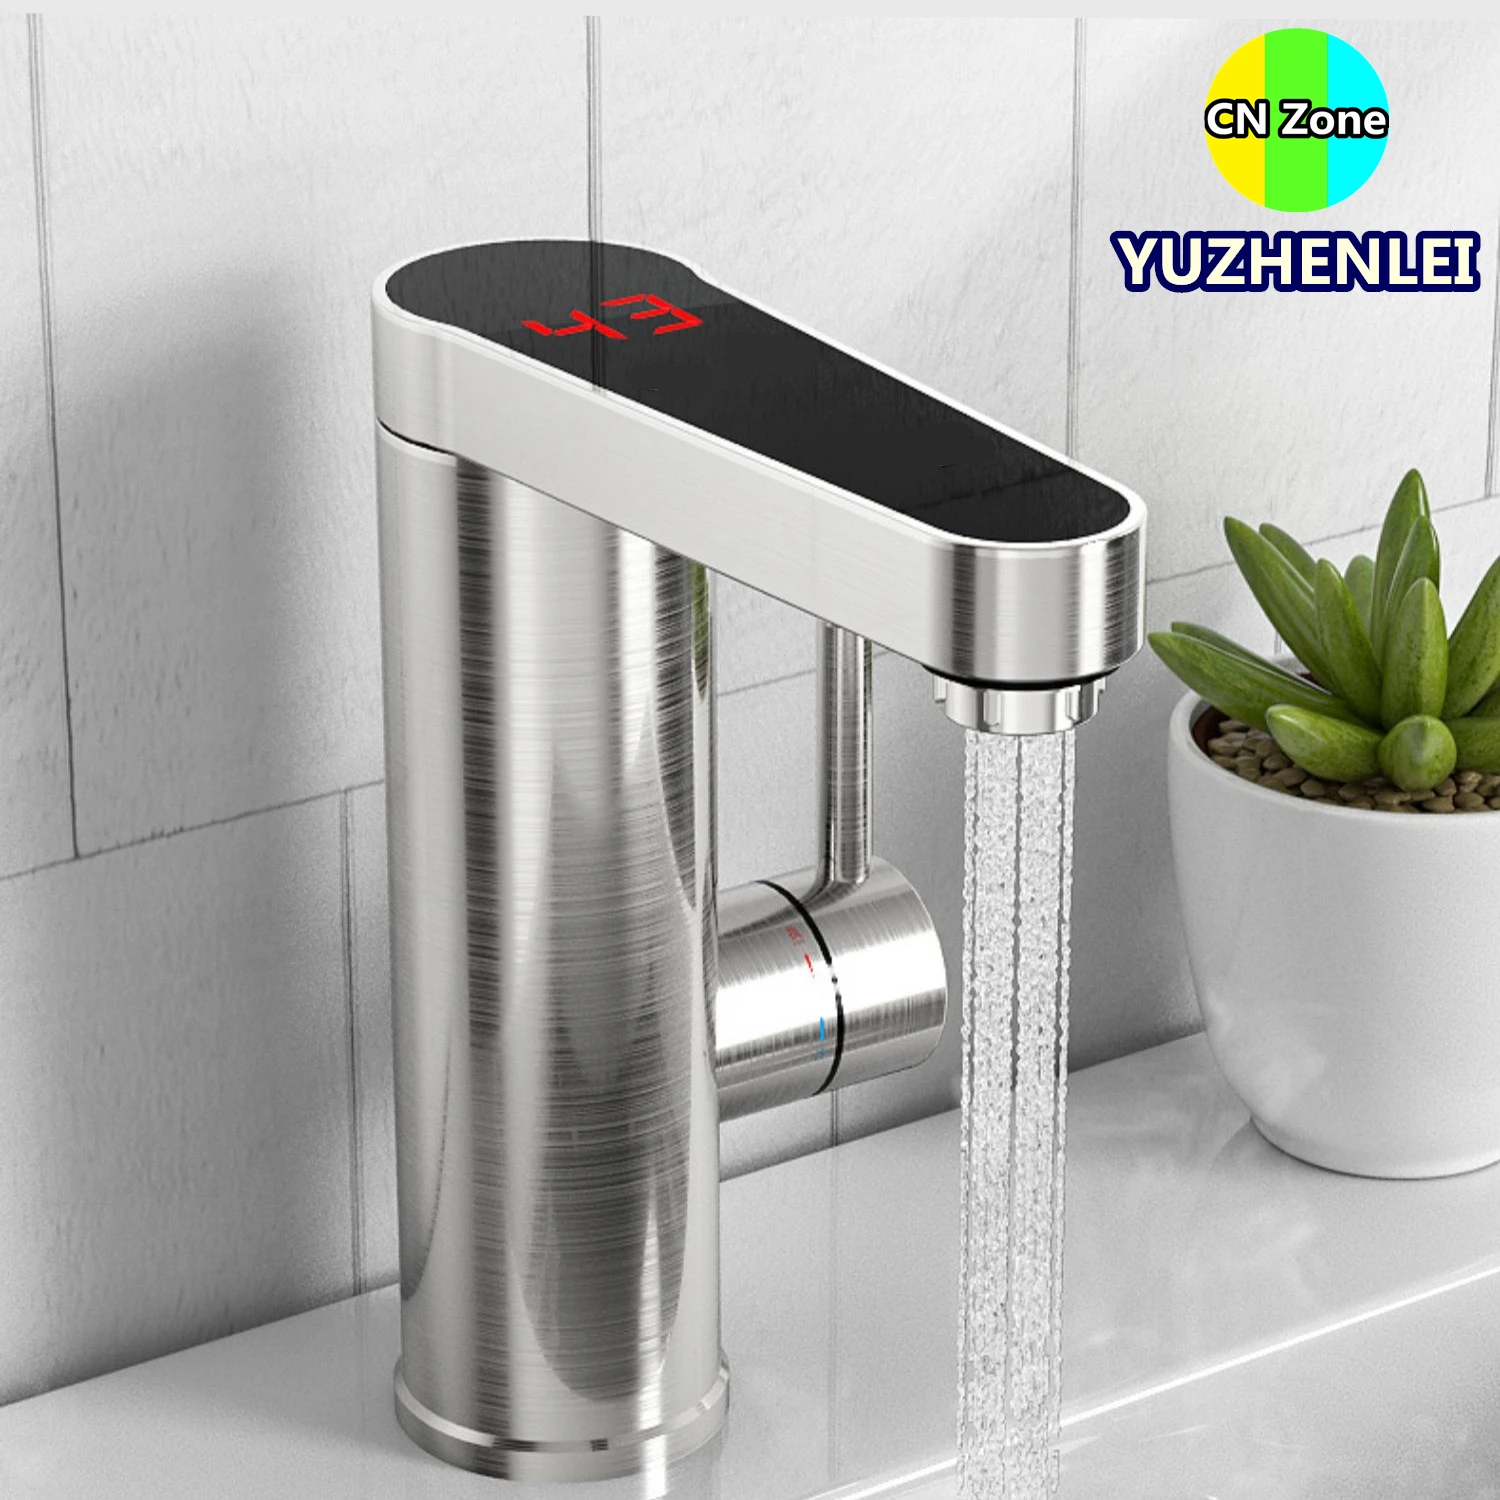 Stainless Steel Instant Hot Water Tap Electric Fast Faucet Heater Tankless Heating 3.4kw Kitchen Washroom Balcony Cold-hot dual-